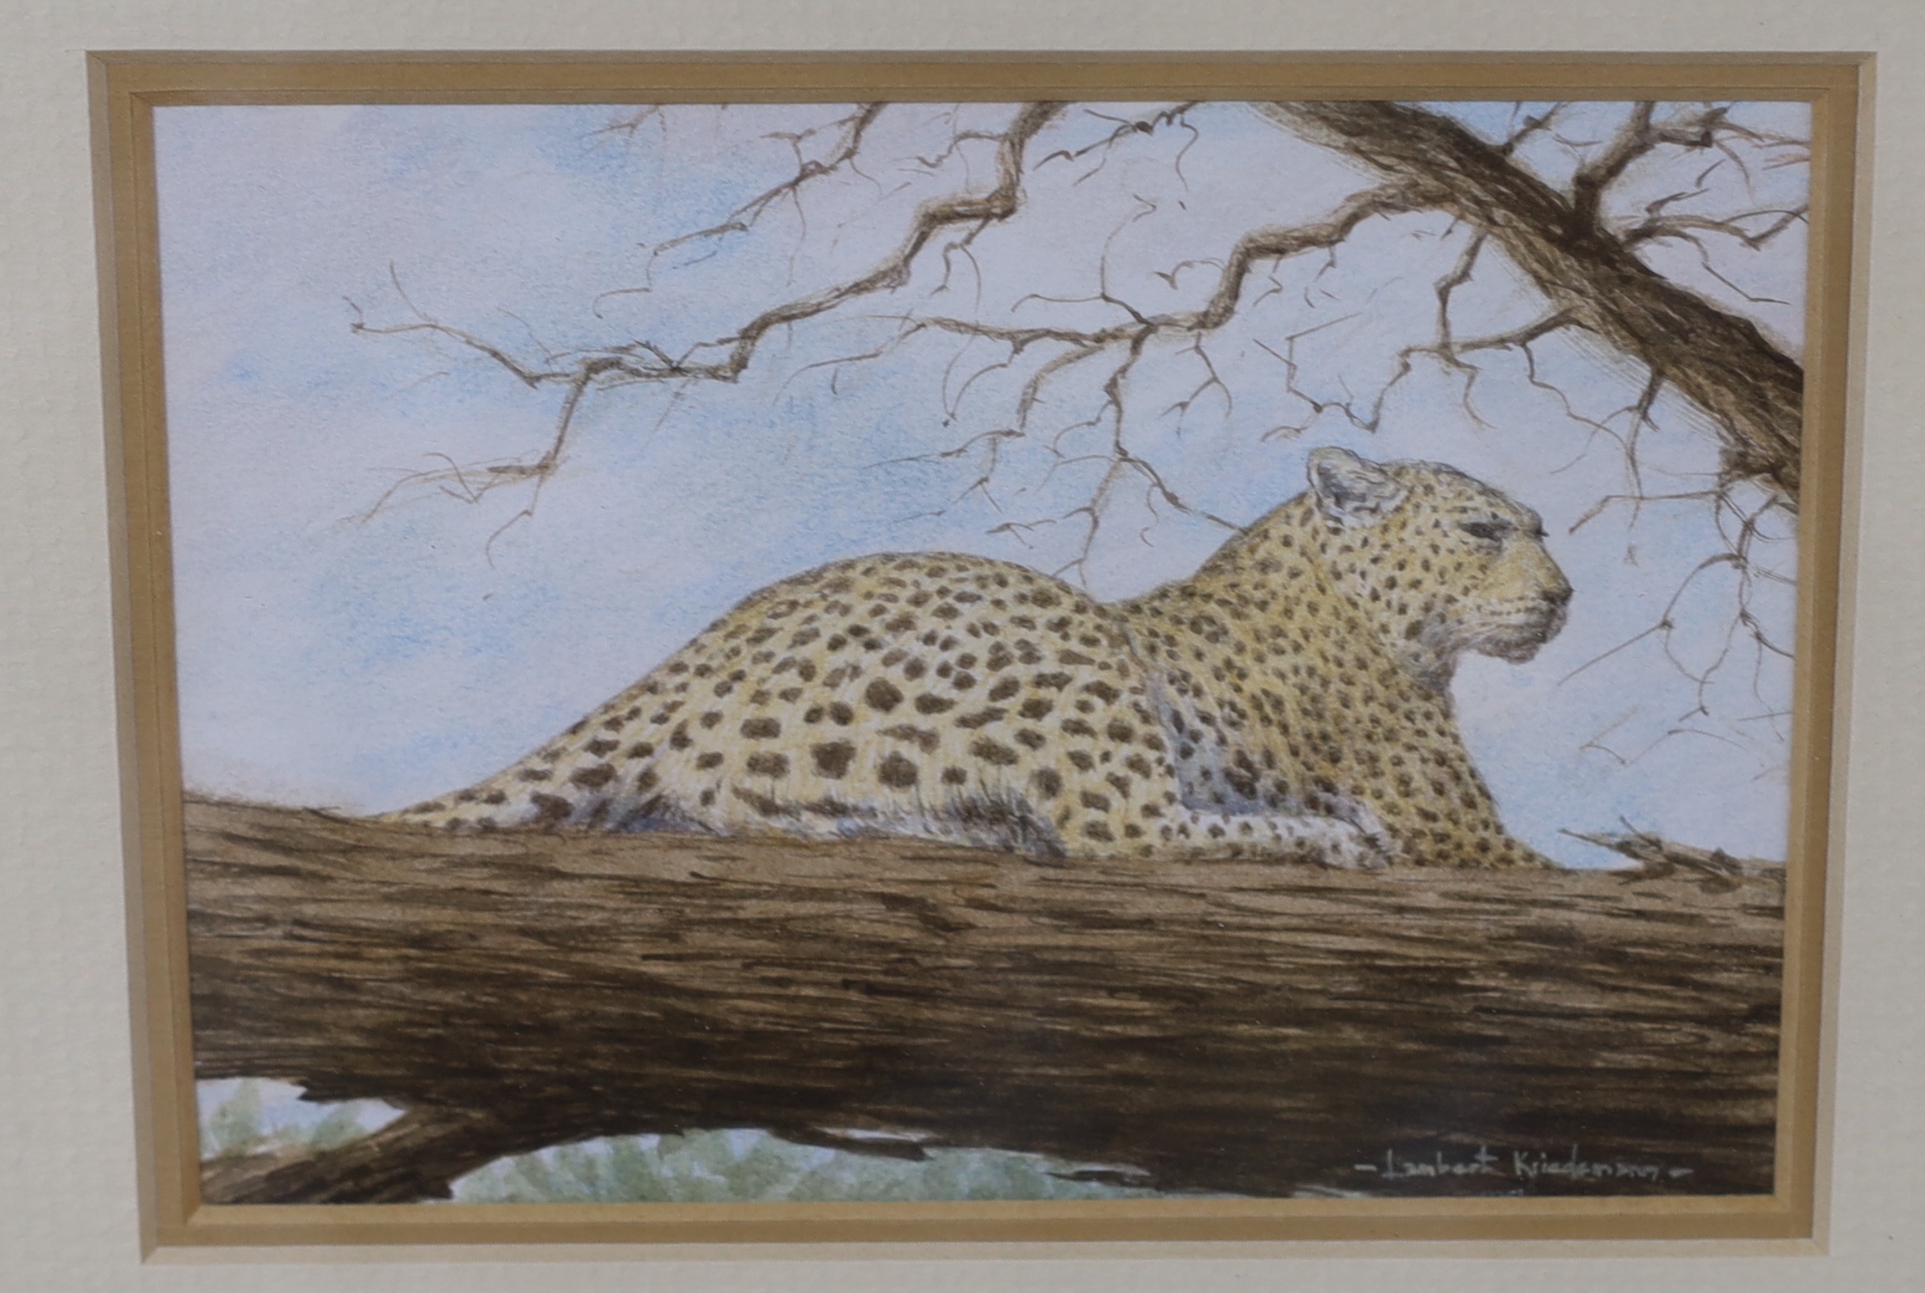 Lambert Kariedemann (South African, b.1951), pair of watercolours, Leopards and antelopes, together with two miniature oils by the same artist, landscapes, each signed, largest 9 x 12.5cm